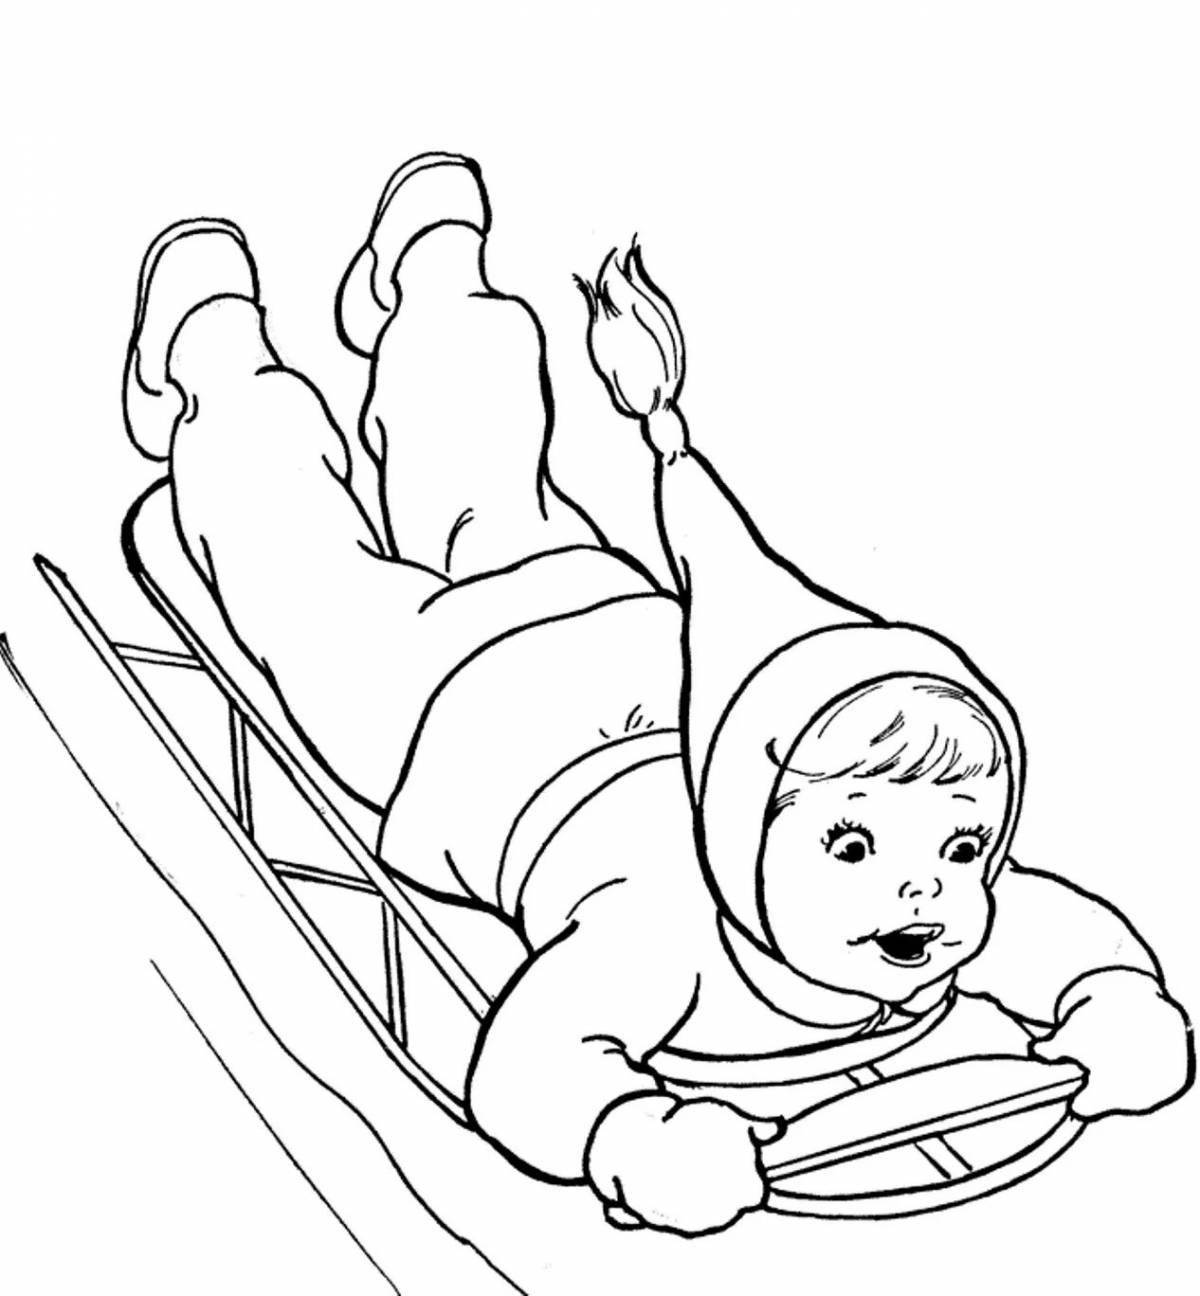 Great winter slide coloring page